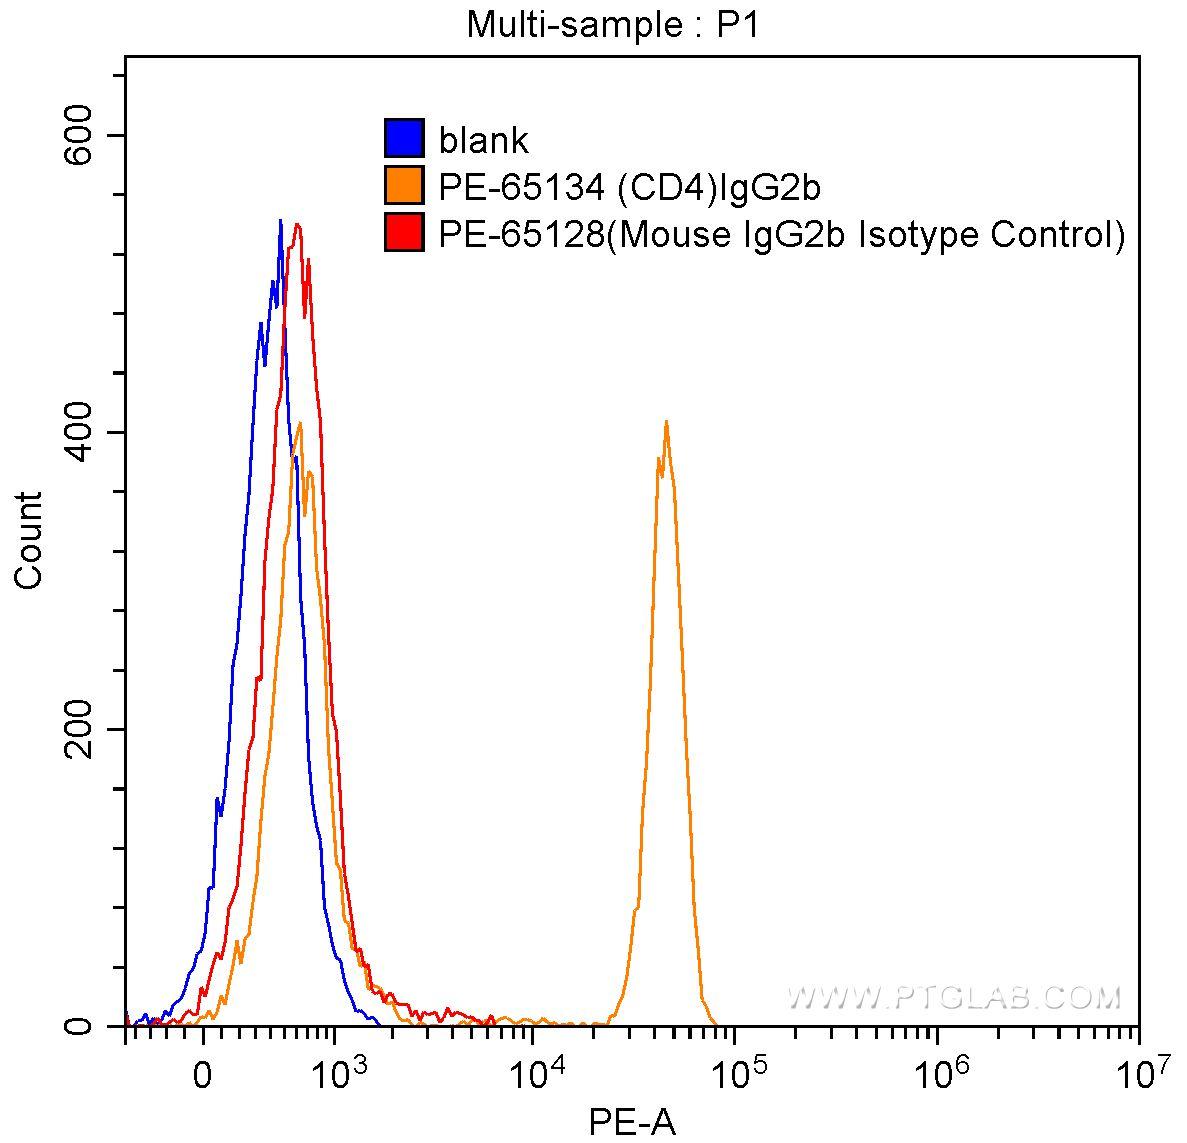 1X10^6 human peripheral blood lymphocytes were surface stained with 0.06 ug PE Mouse IgG2b Isotype Control (PE-65128, clone: MPC-11) (red) or 0.06 ug PE Anti-Human CD4 (PE-65134, clone: OKT4) (orange), or not stained (blank) (blue). Samples were not fixed.